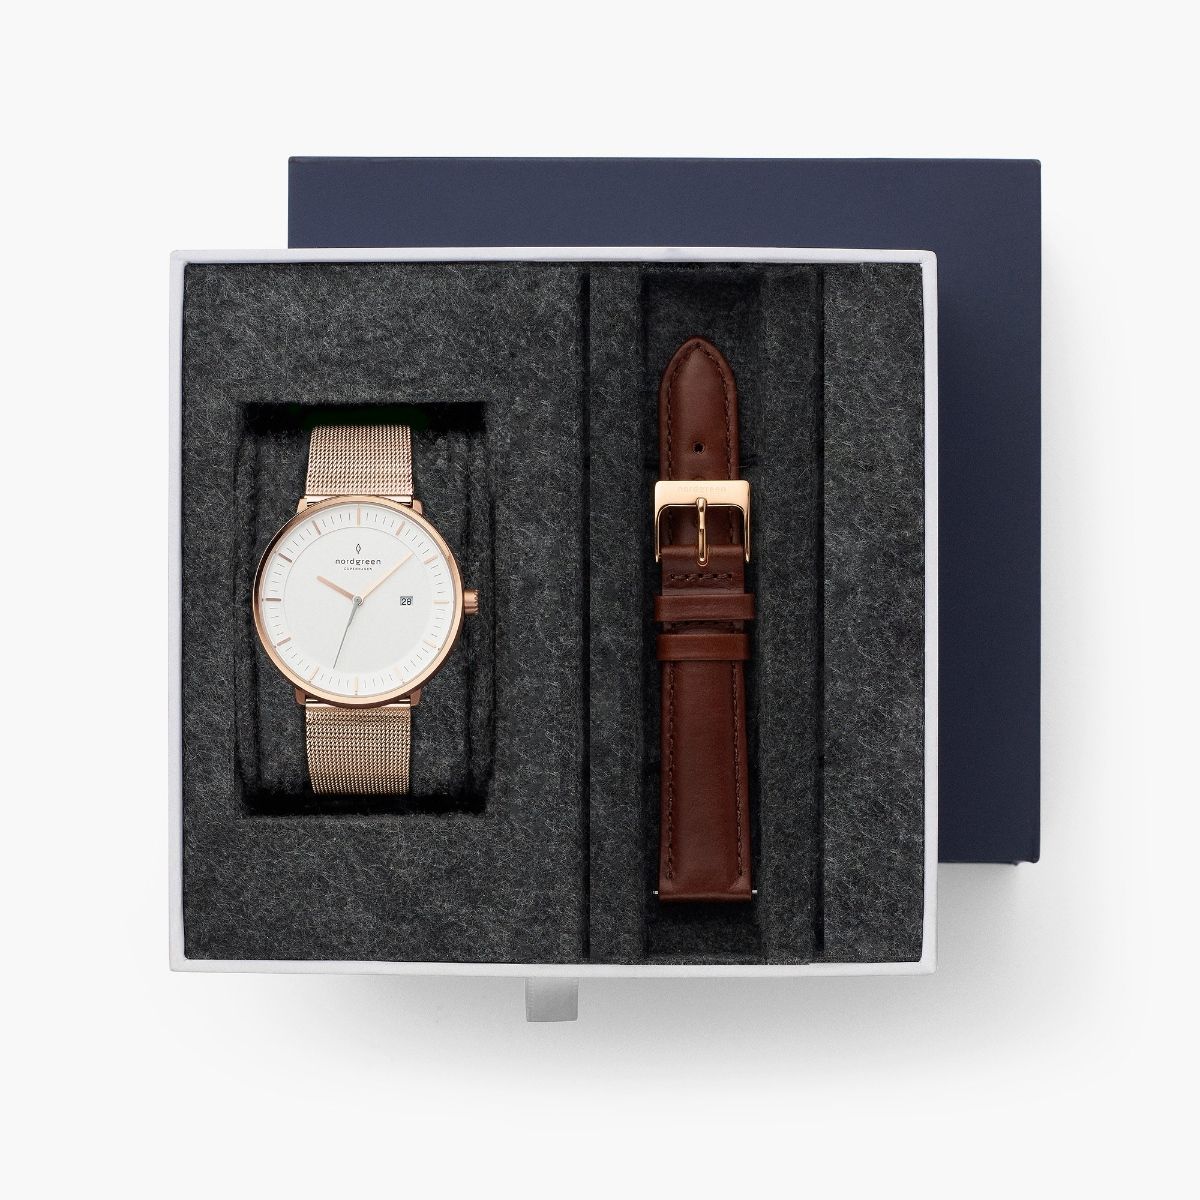 Nordgreen Philosopher Unisex Watch bundle, Rose Gold with Rose Gold Mesh and Brown Leather Strap.